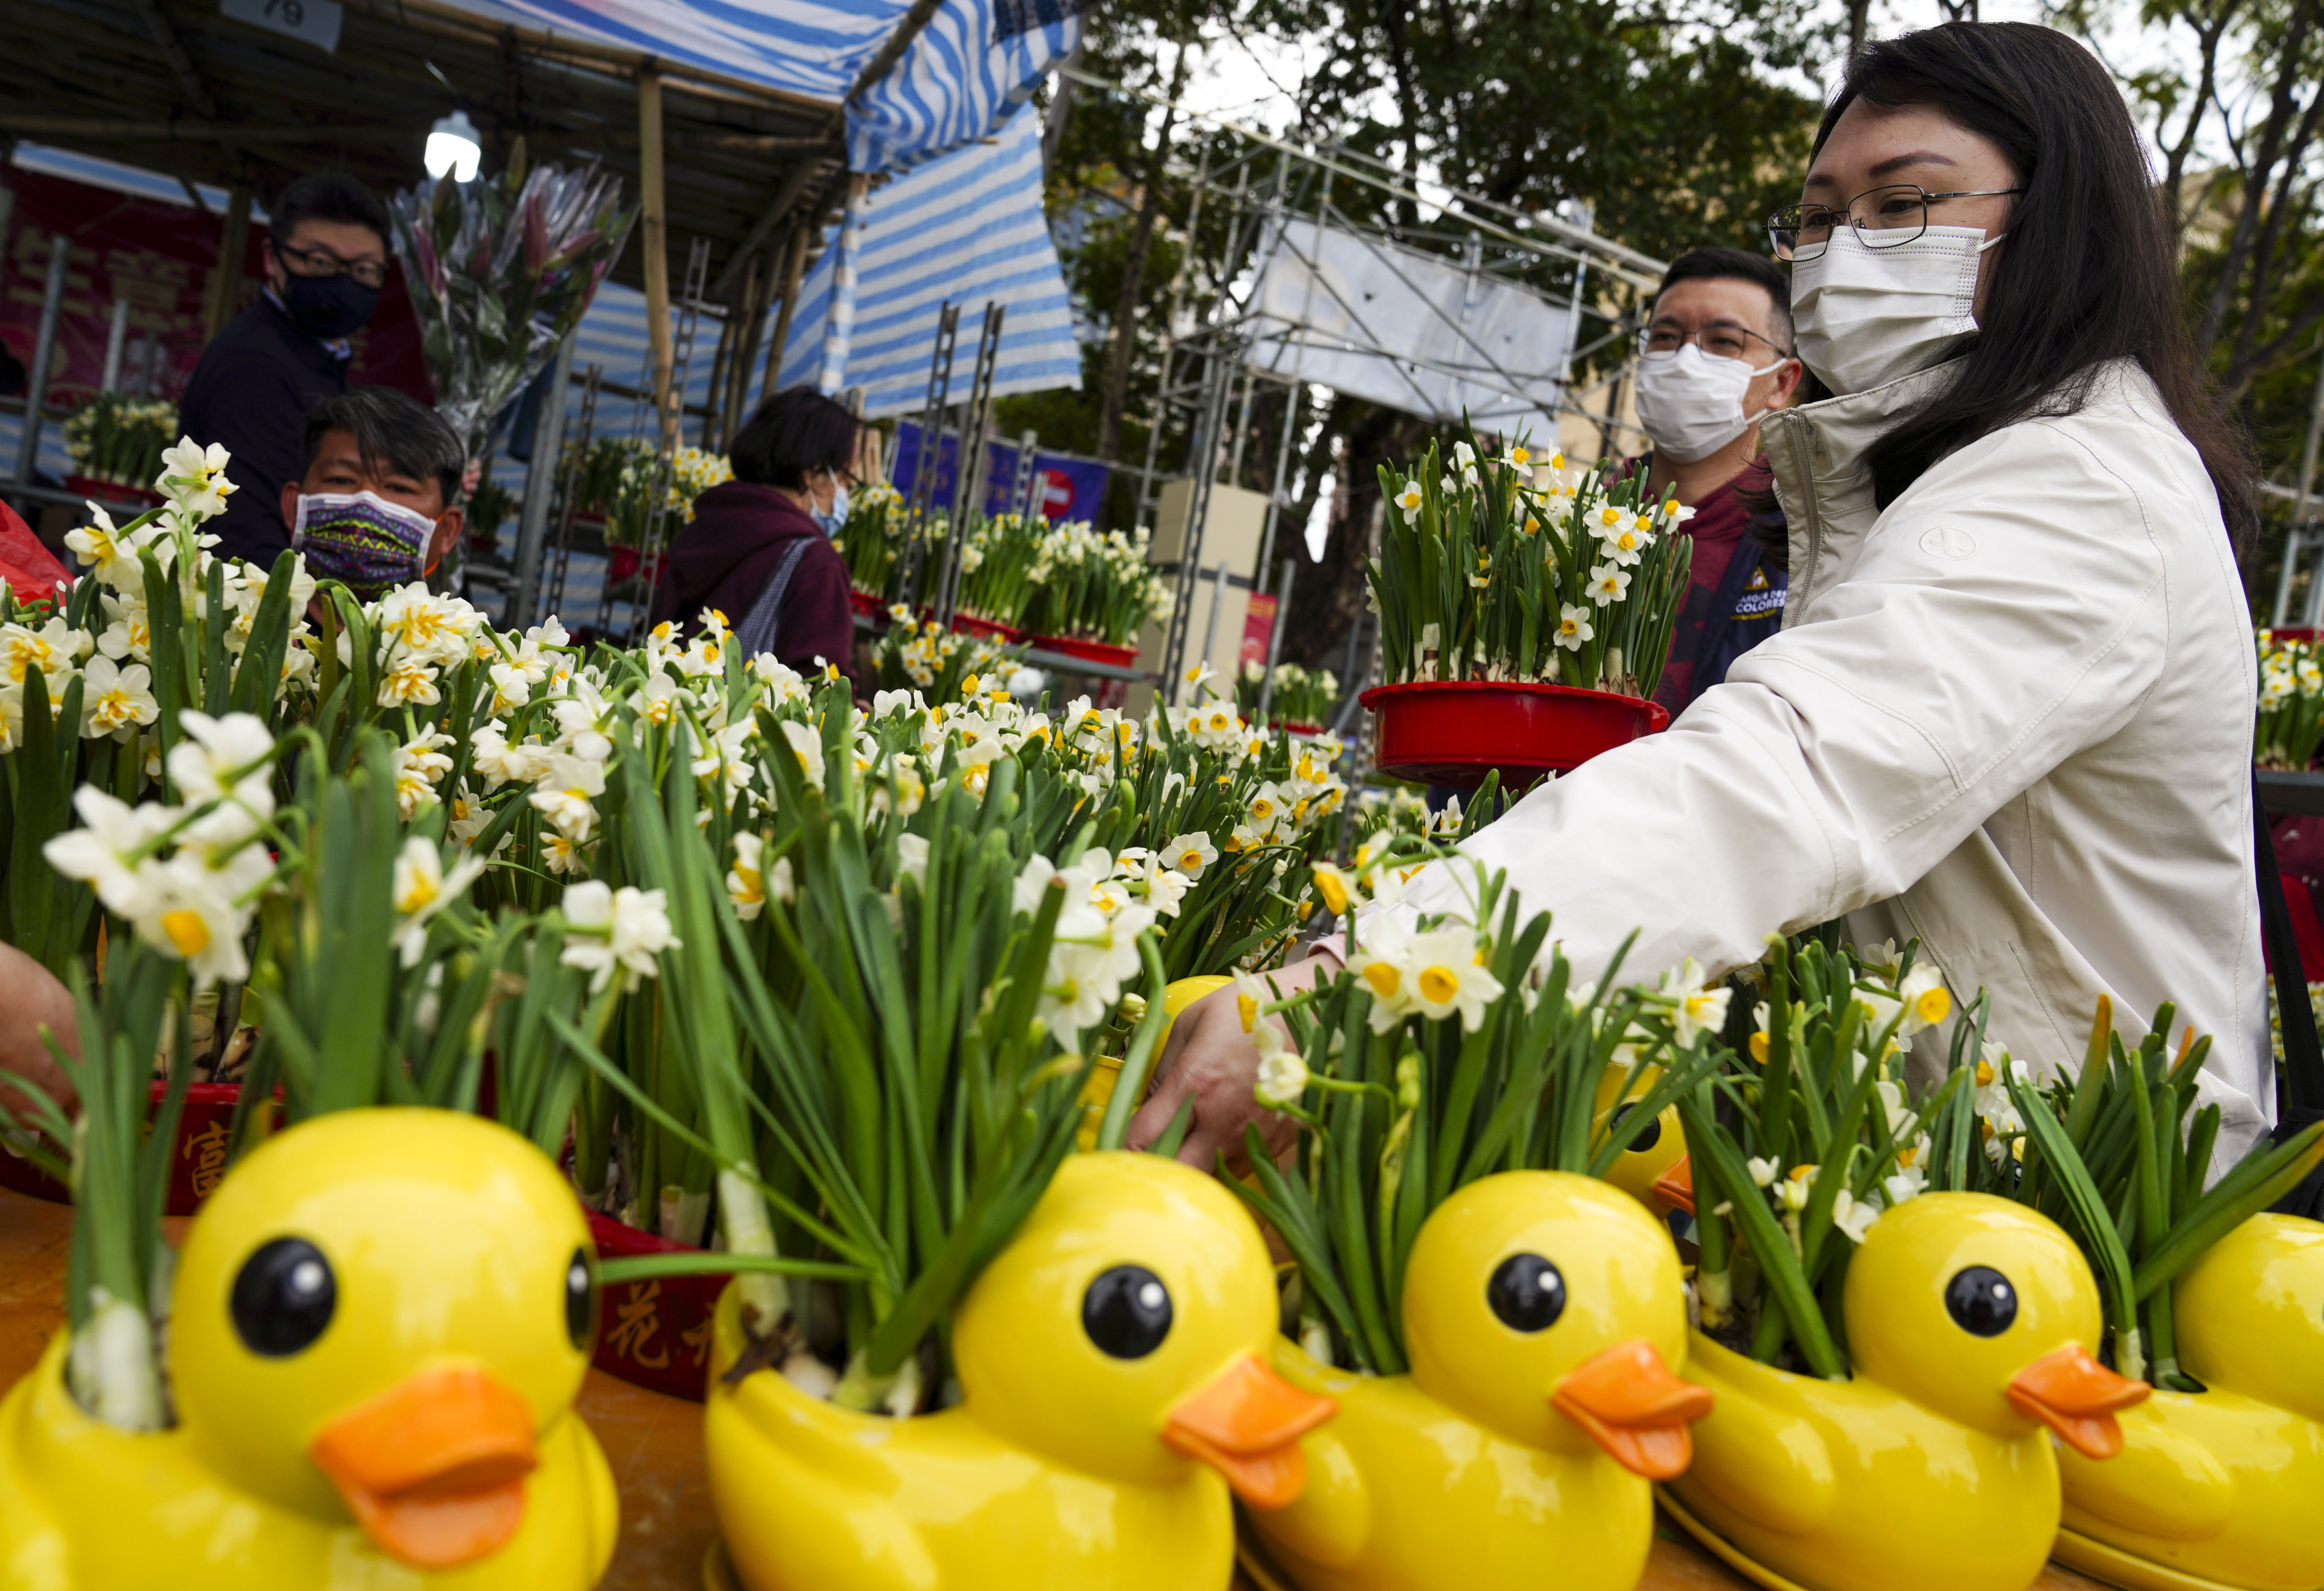 Customers visit the Lunar New Year flower market at Victoria Park in Causeway Bay, amid the Covid-19 crowd-control measures in 2021. Photo: Sam Tsang